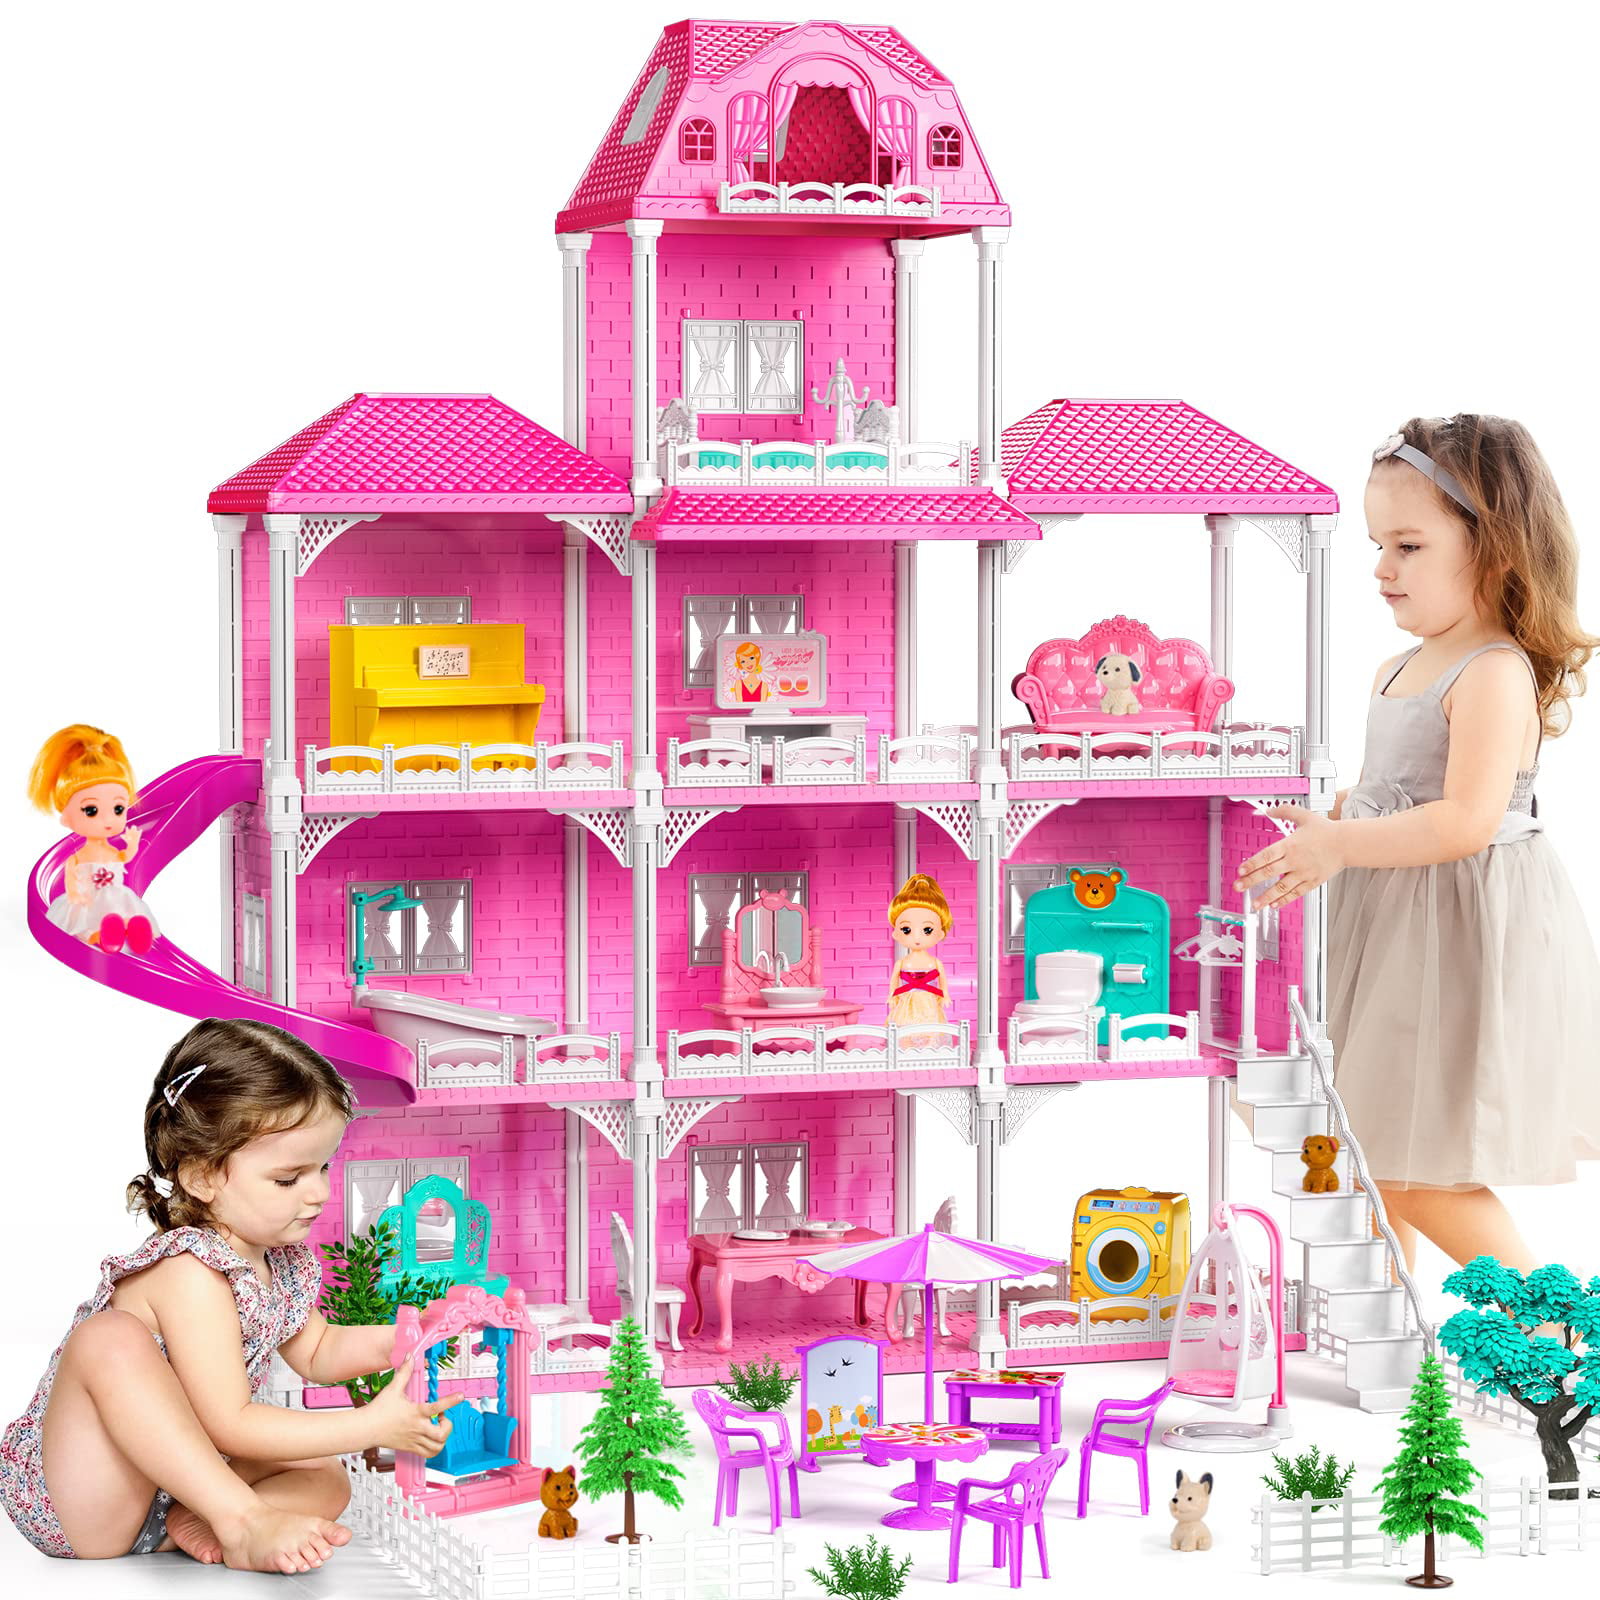  Girls Doll House for 3 4 5 6 7 8 Year Old Toy, Dollhouse  Furniture and Accessories Pink Dream House Princesses, DIY Building Playset  Pretend Play Toddler Doll Houses for Kids